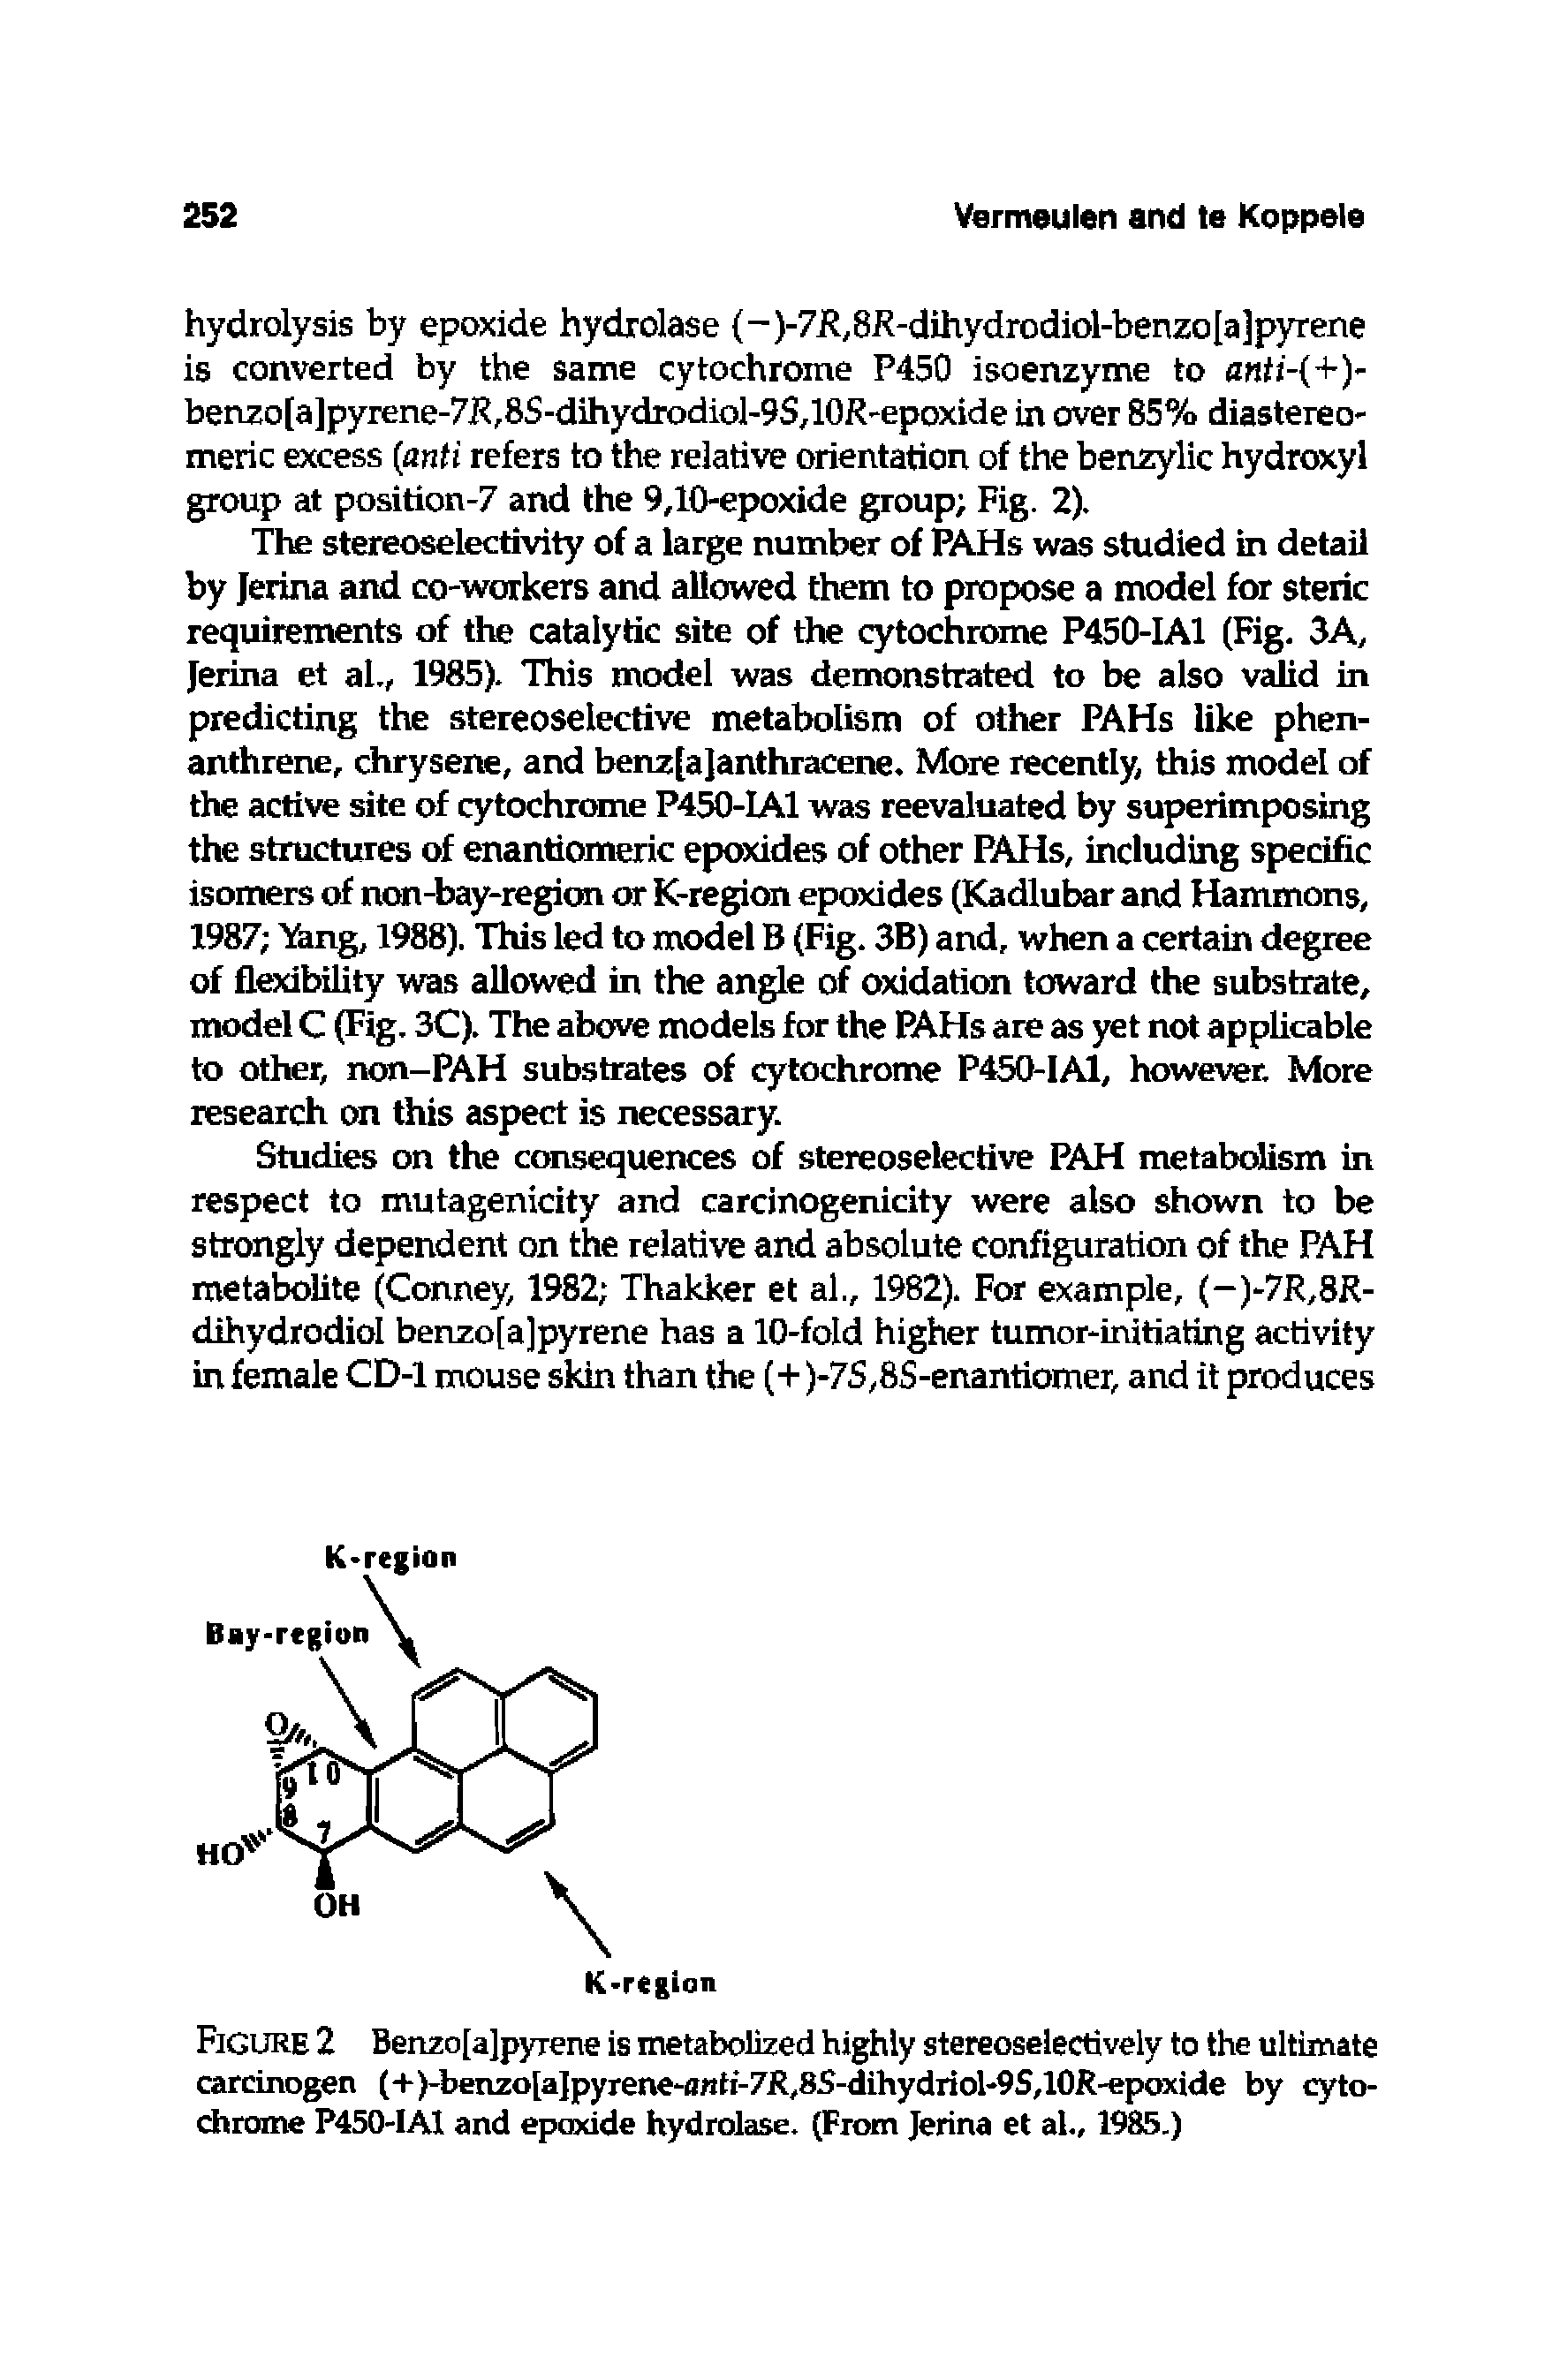 Figure 2 Benzo[a]pyrene is metabolized highly stereoseiectively to the ultimate carcinogen (+)-benzo[a]pyrene- ntf-7R,8S-dihydriol-9S,10R-epoxide by cytochrome P450-IA1 and epoxide hydrolase. (From Jerina et al., 1985.)...